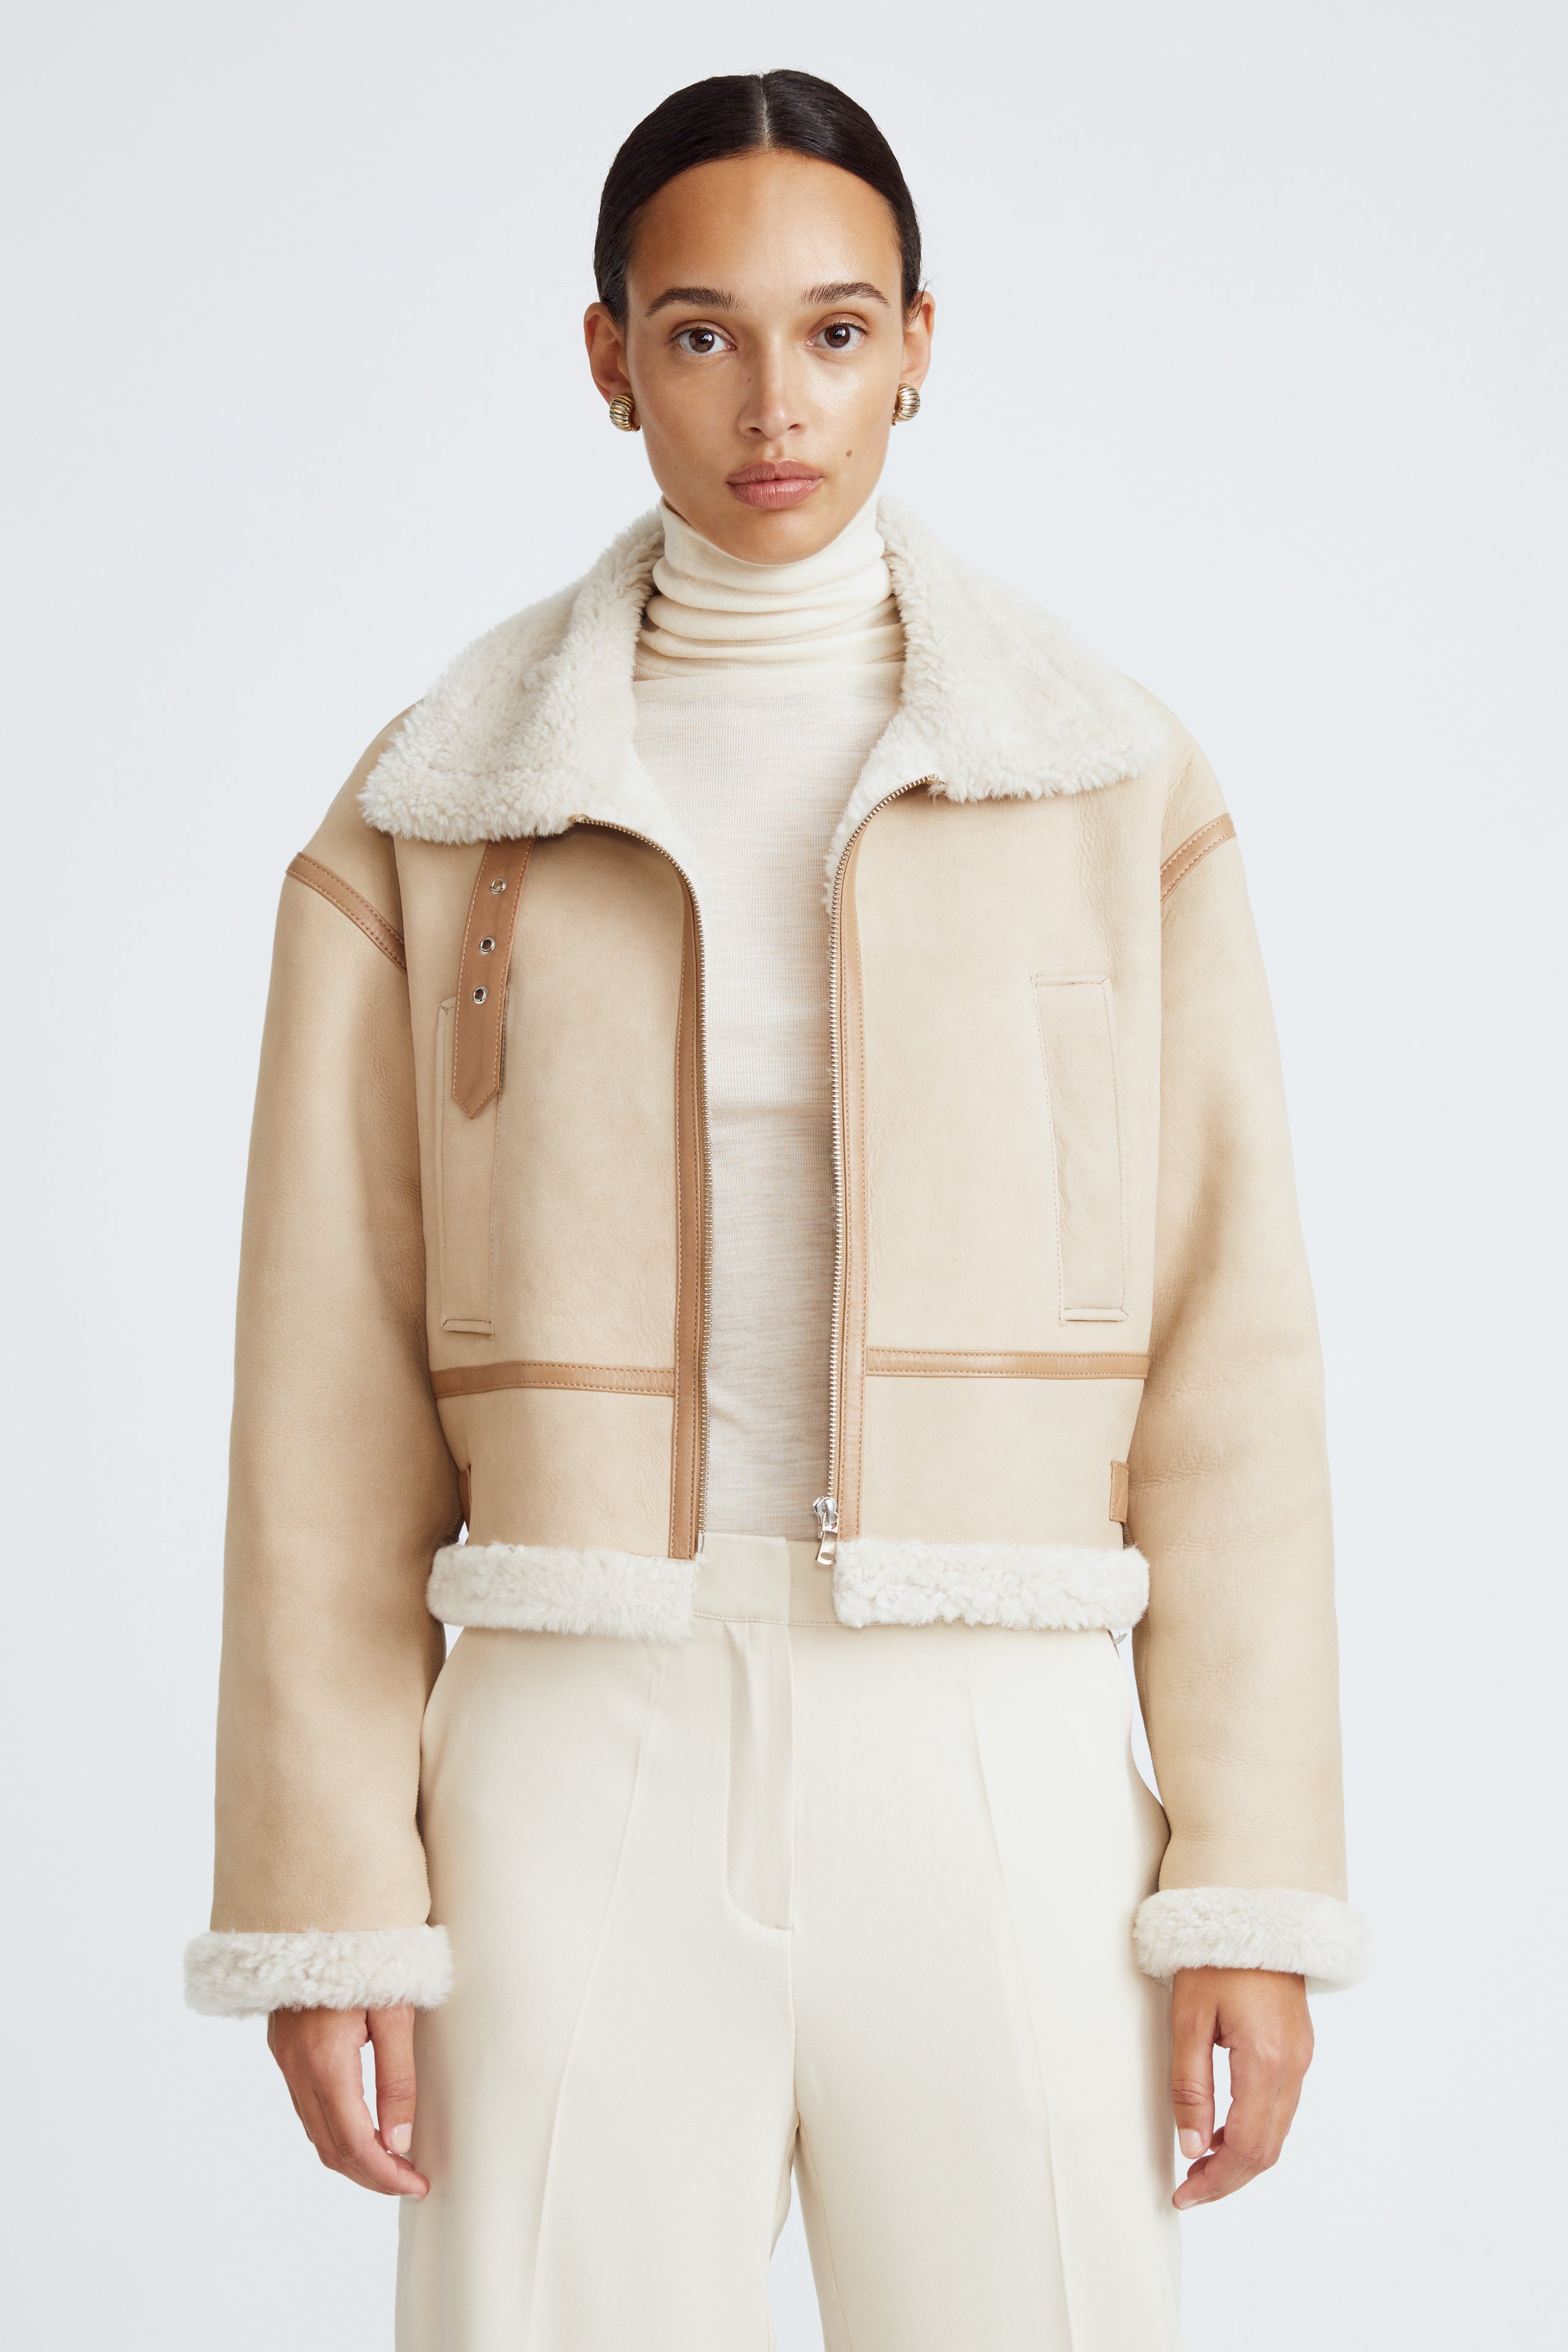 Model is wearing the Marco Cream Ivory Shearling Aviator Jacket Close Up